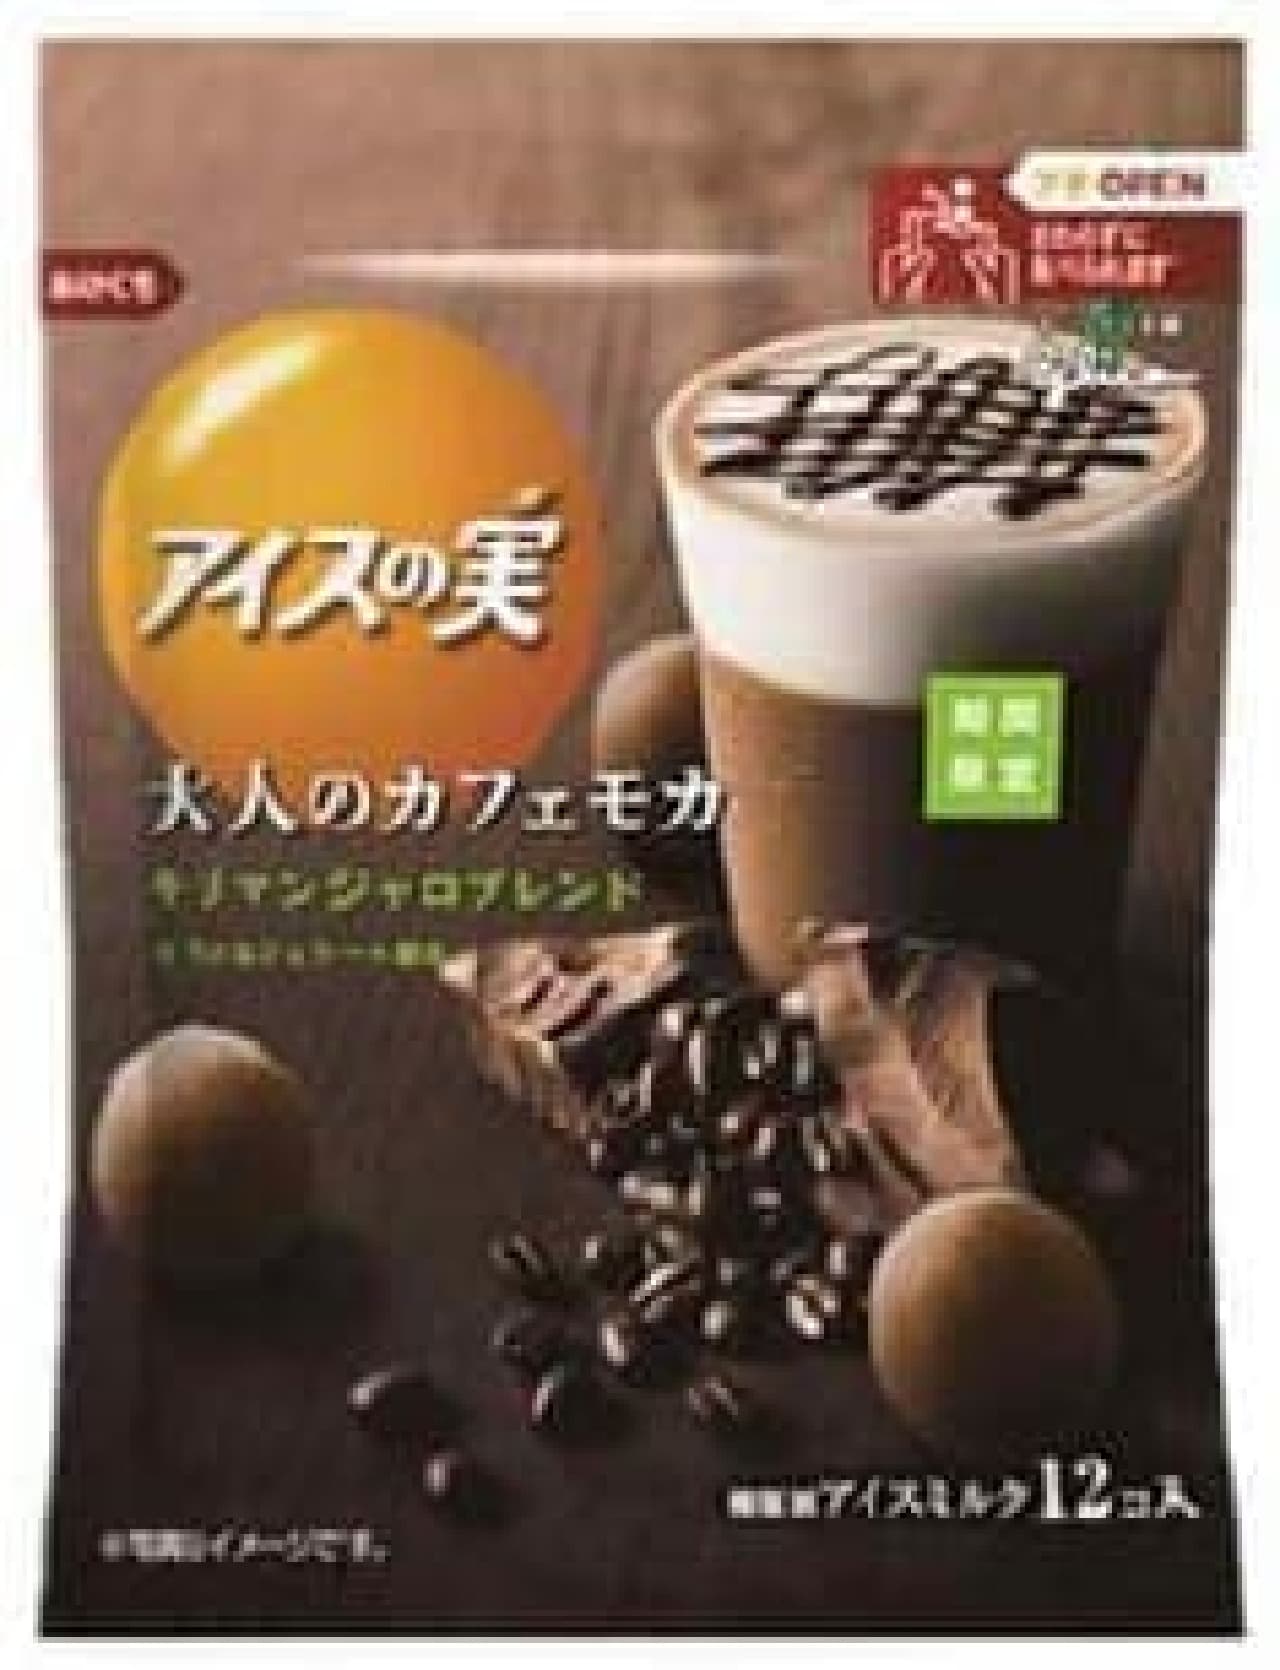 The ice cream is really "adult cafe mocha"!